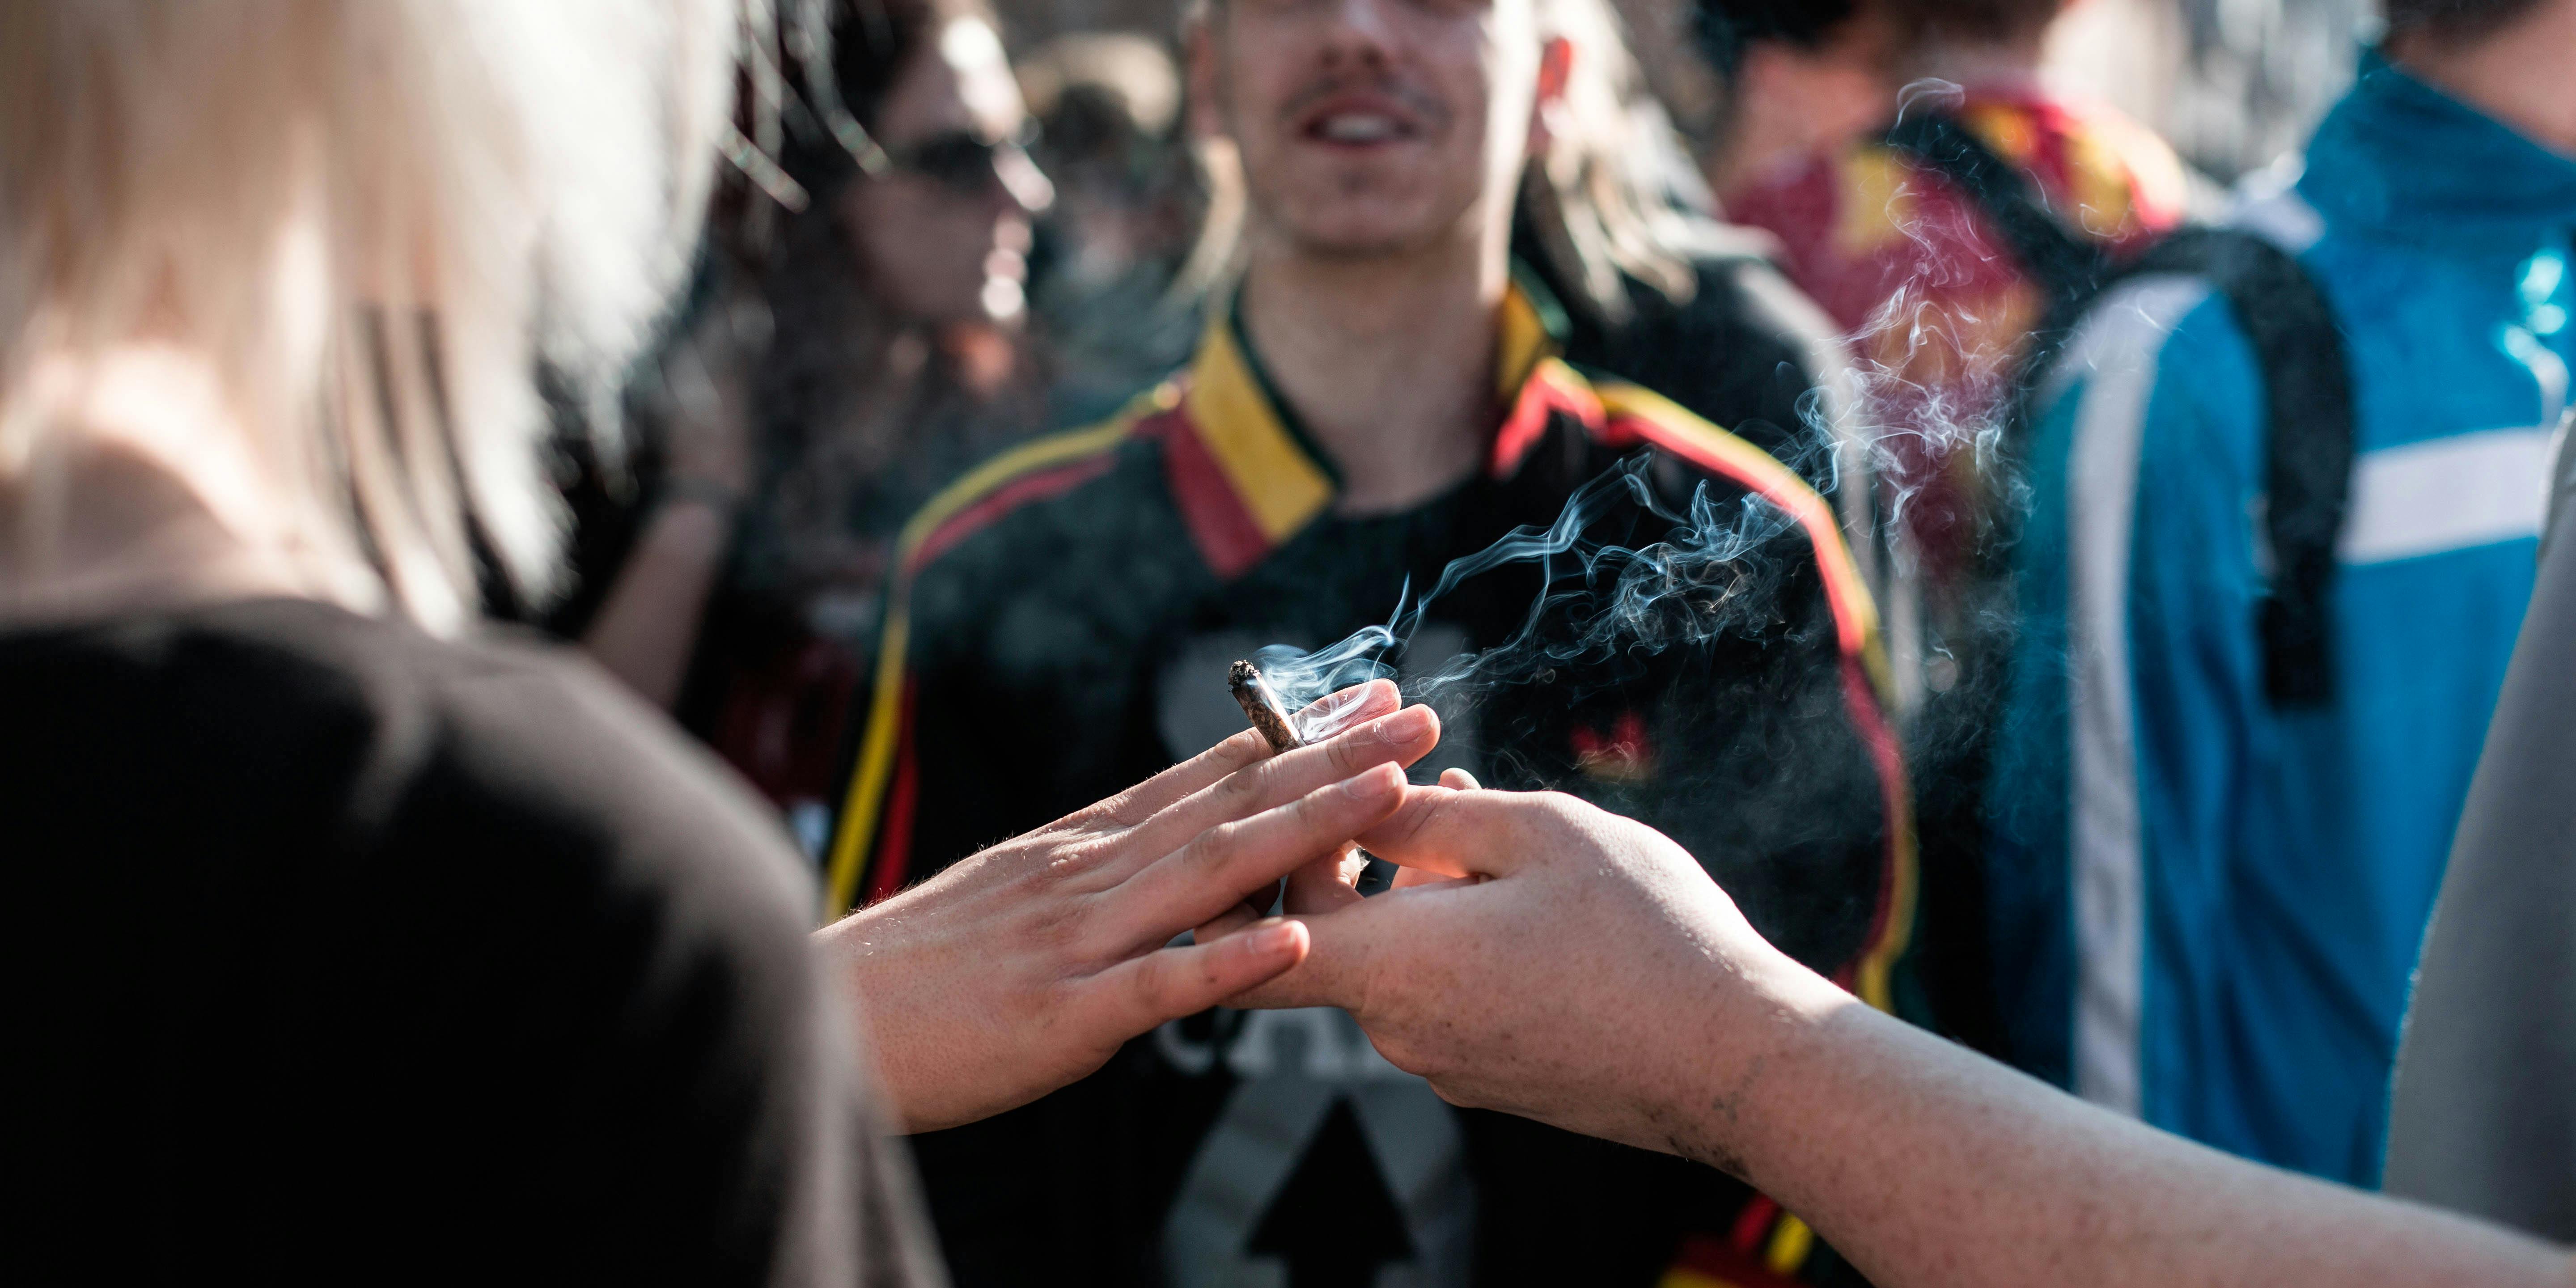 A joint is passed from one hand to another at the annual Pro 420 Cannabis Day in Copenhagen. Denmark 20/04 2014. A recent study found neighborhood dispensaries don't increase adolescent cannabis use